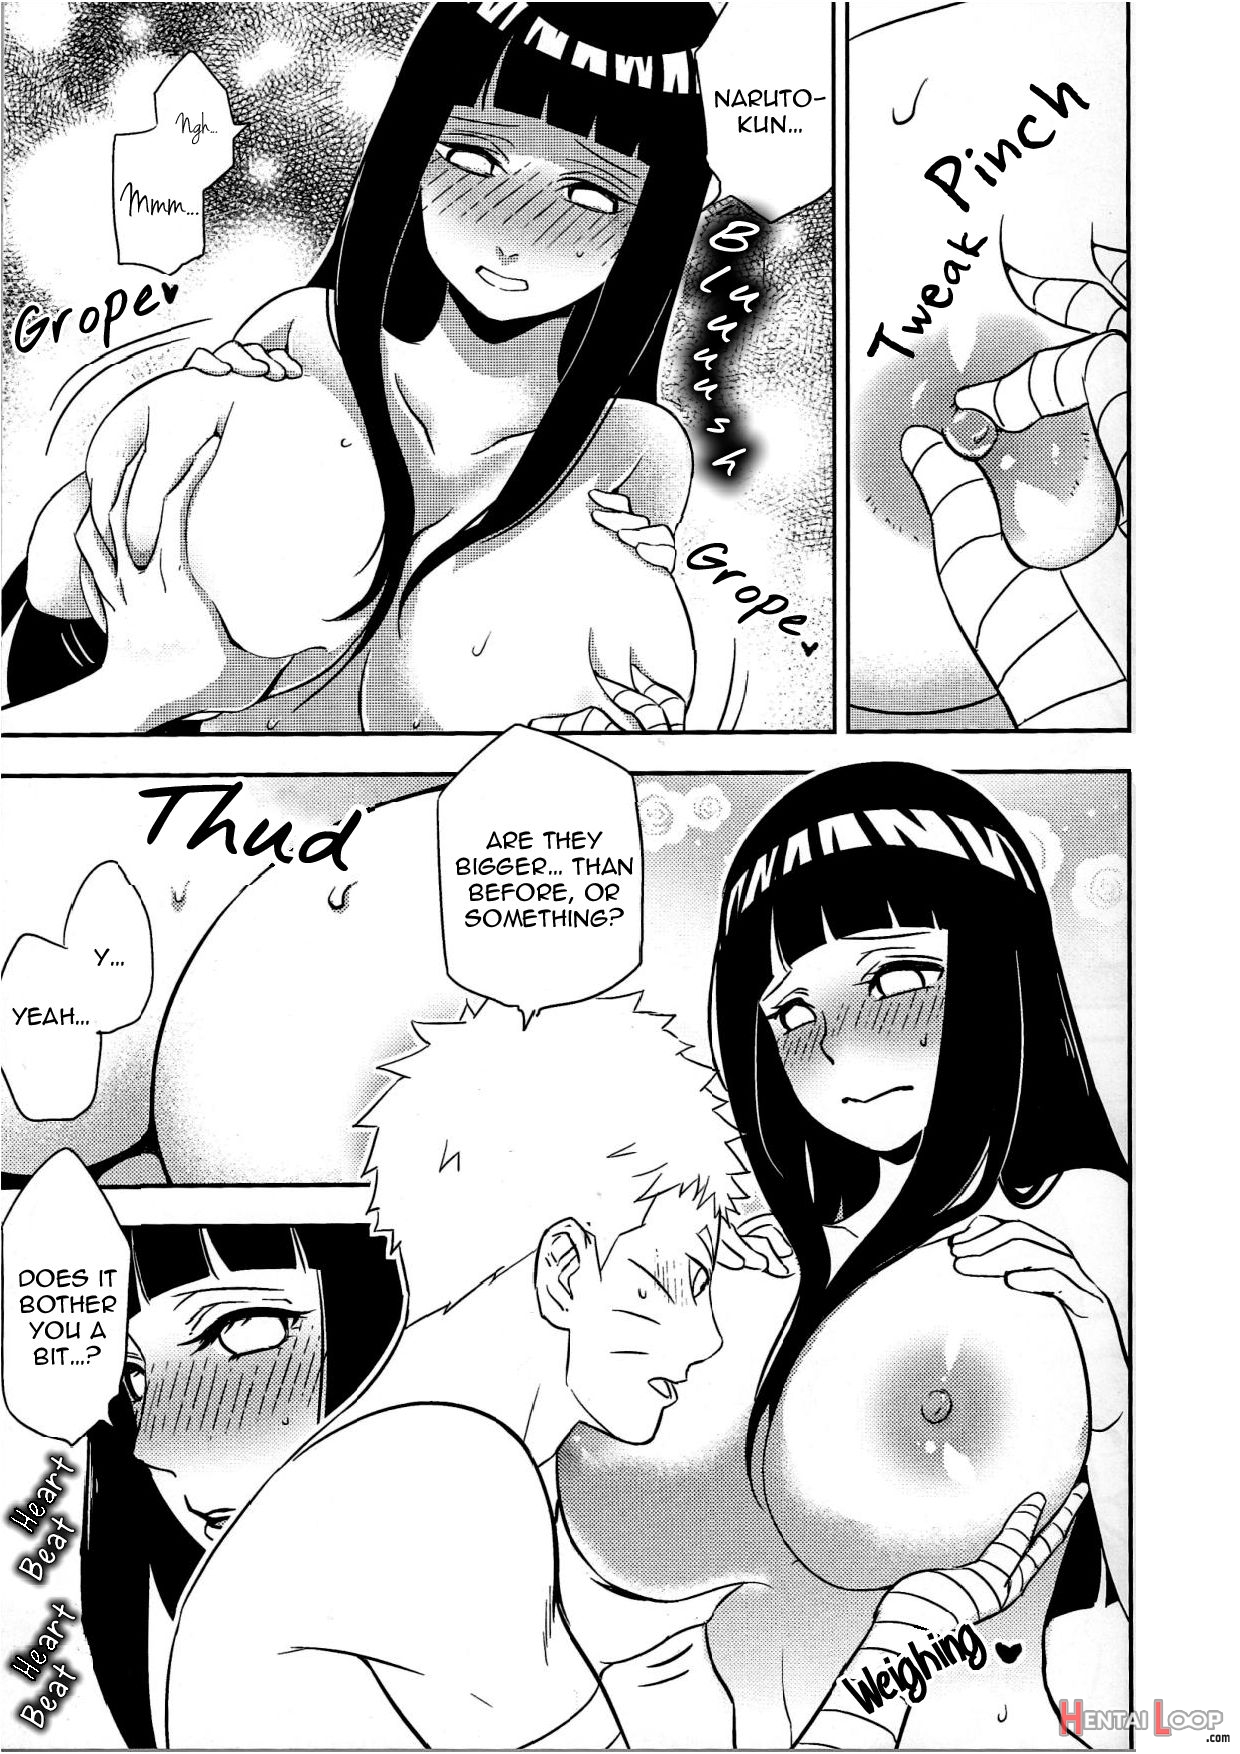 Naruto-kun Its Impossible For Me To Say No To You page 9